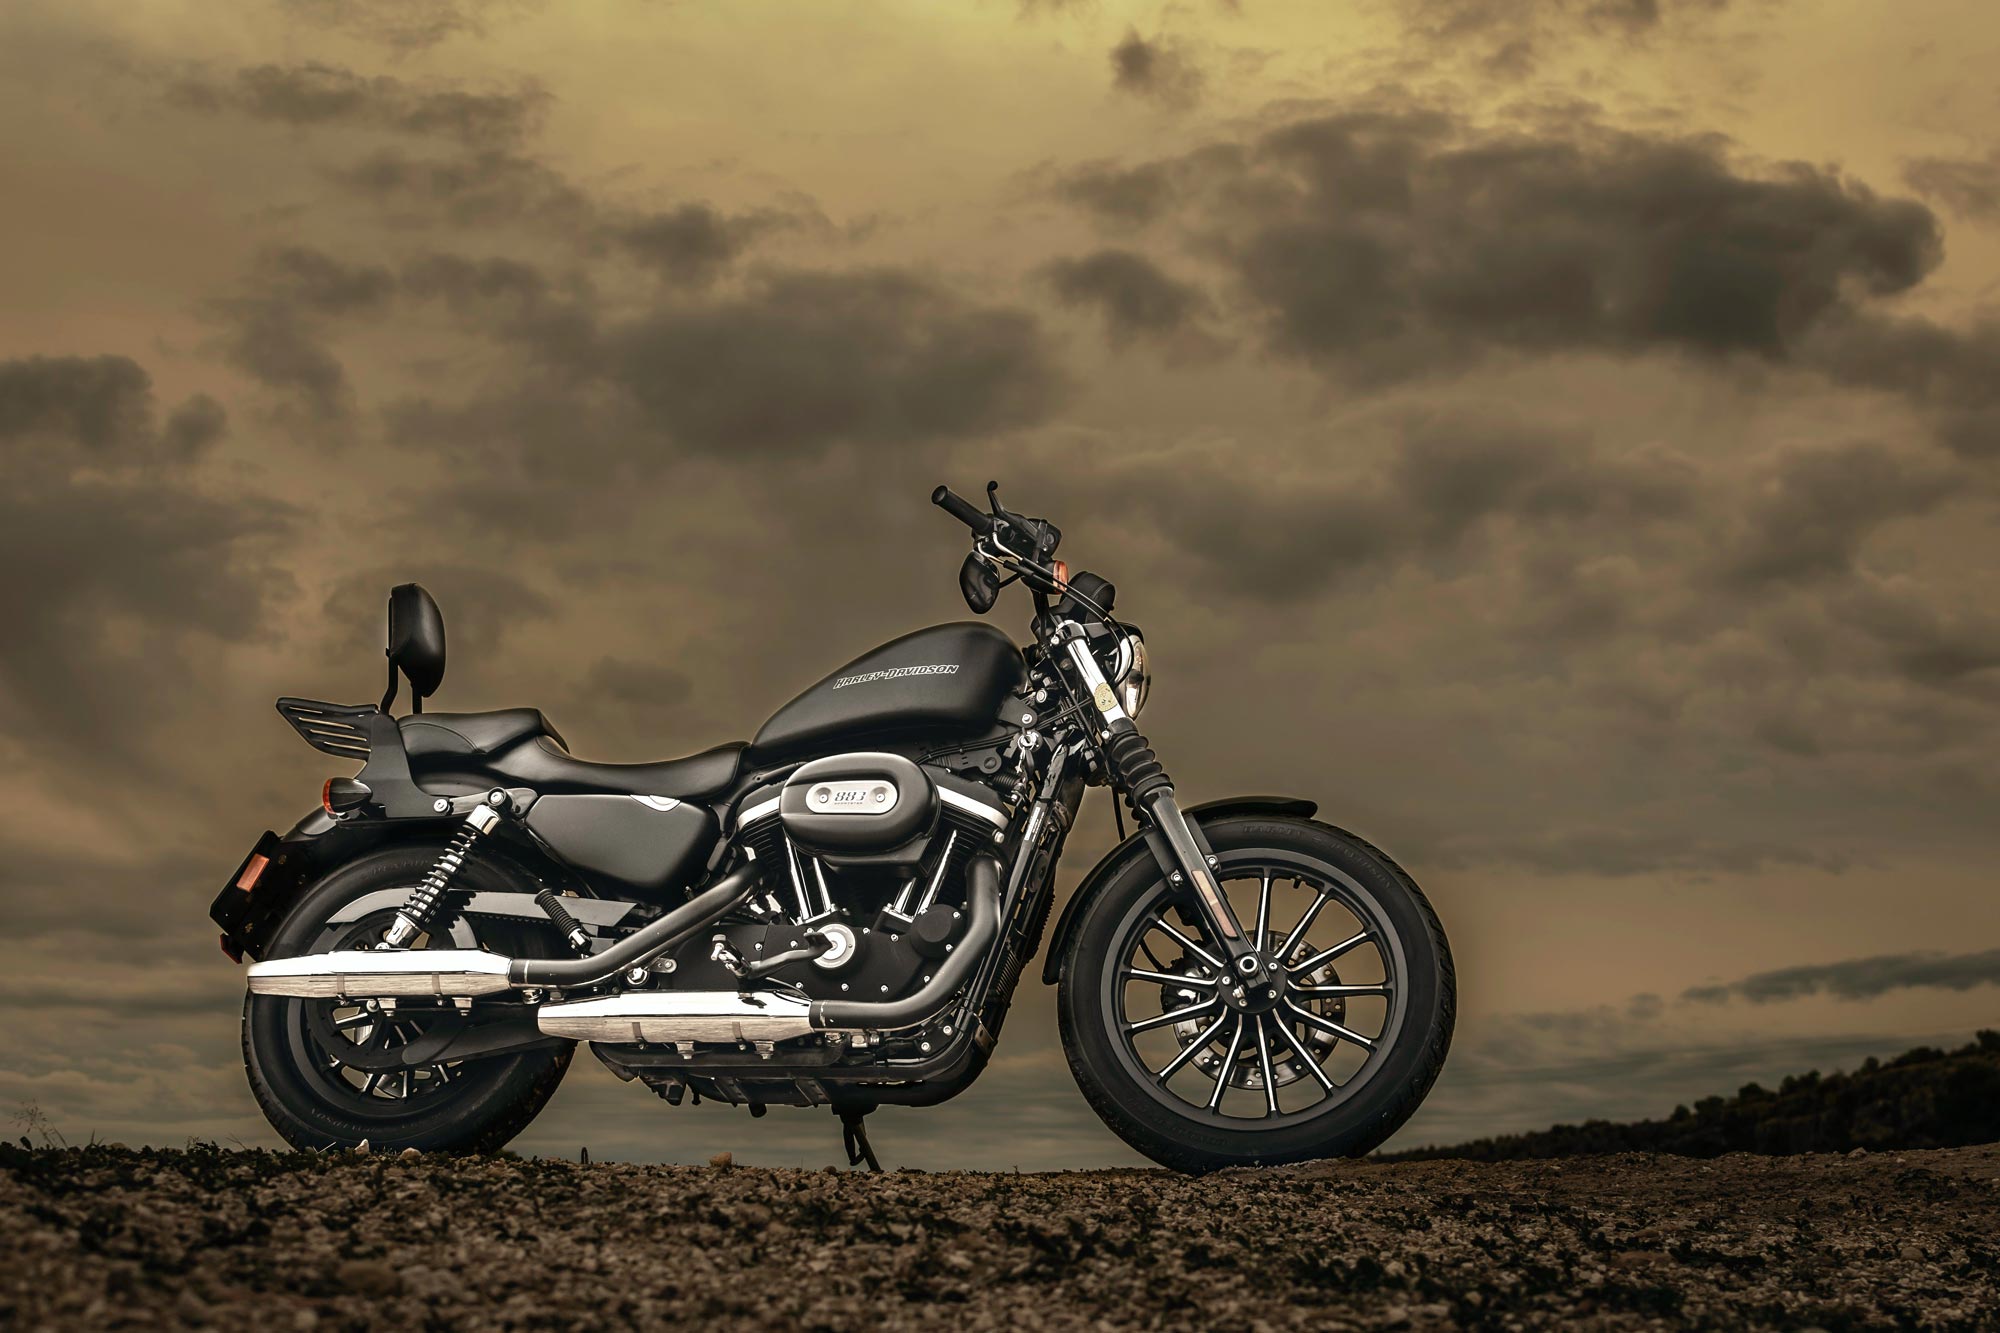 A black motorcycle is parked on a dirt road, its tire pressure matching the recommended values on the Harley Davidson chart.